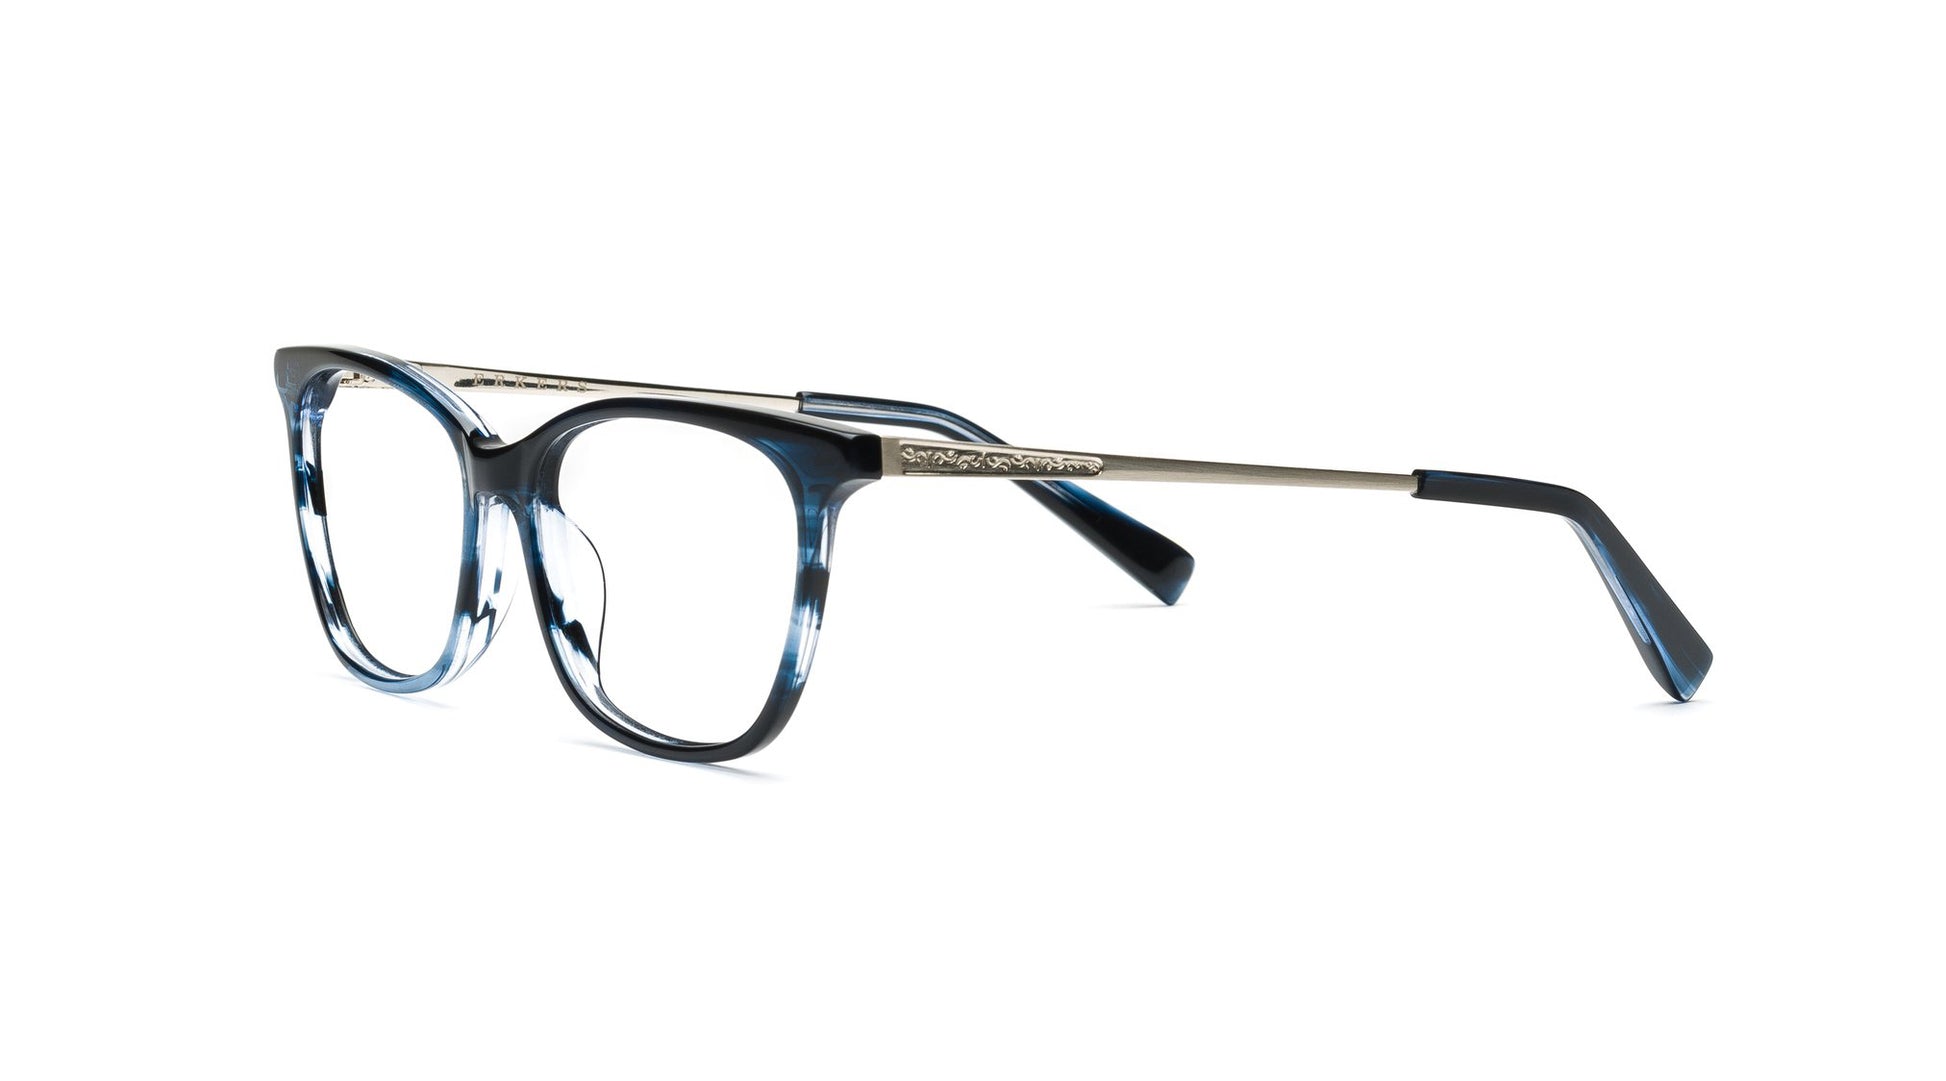 A feminine frame with a soft uplift. A refined and subtle frame that has increased durability with the metal temples.